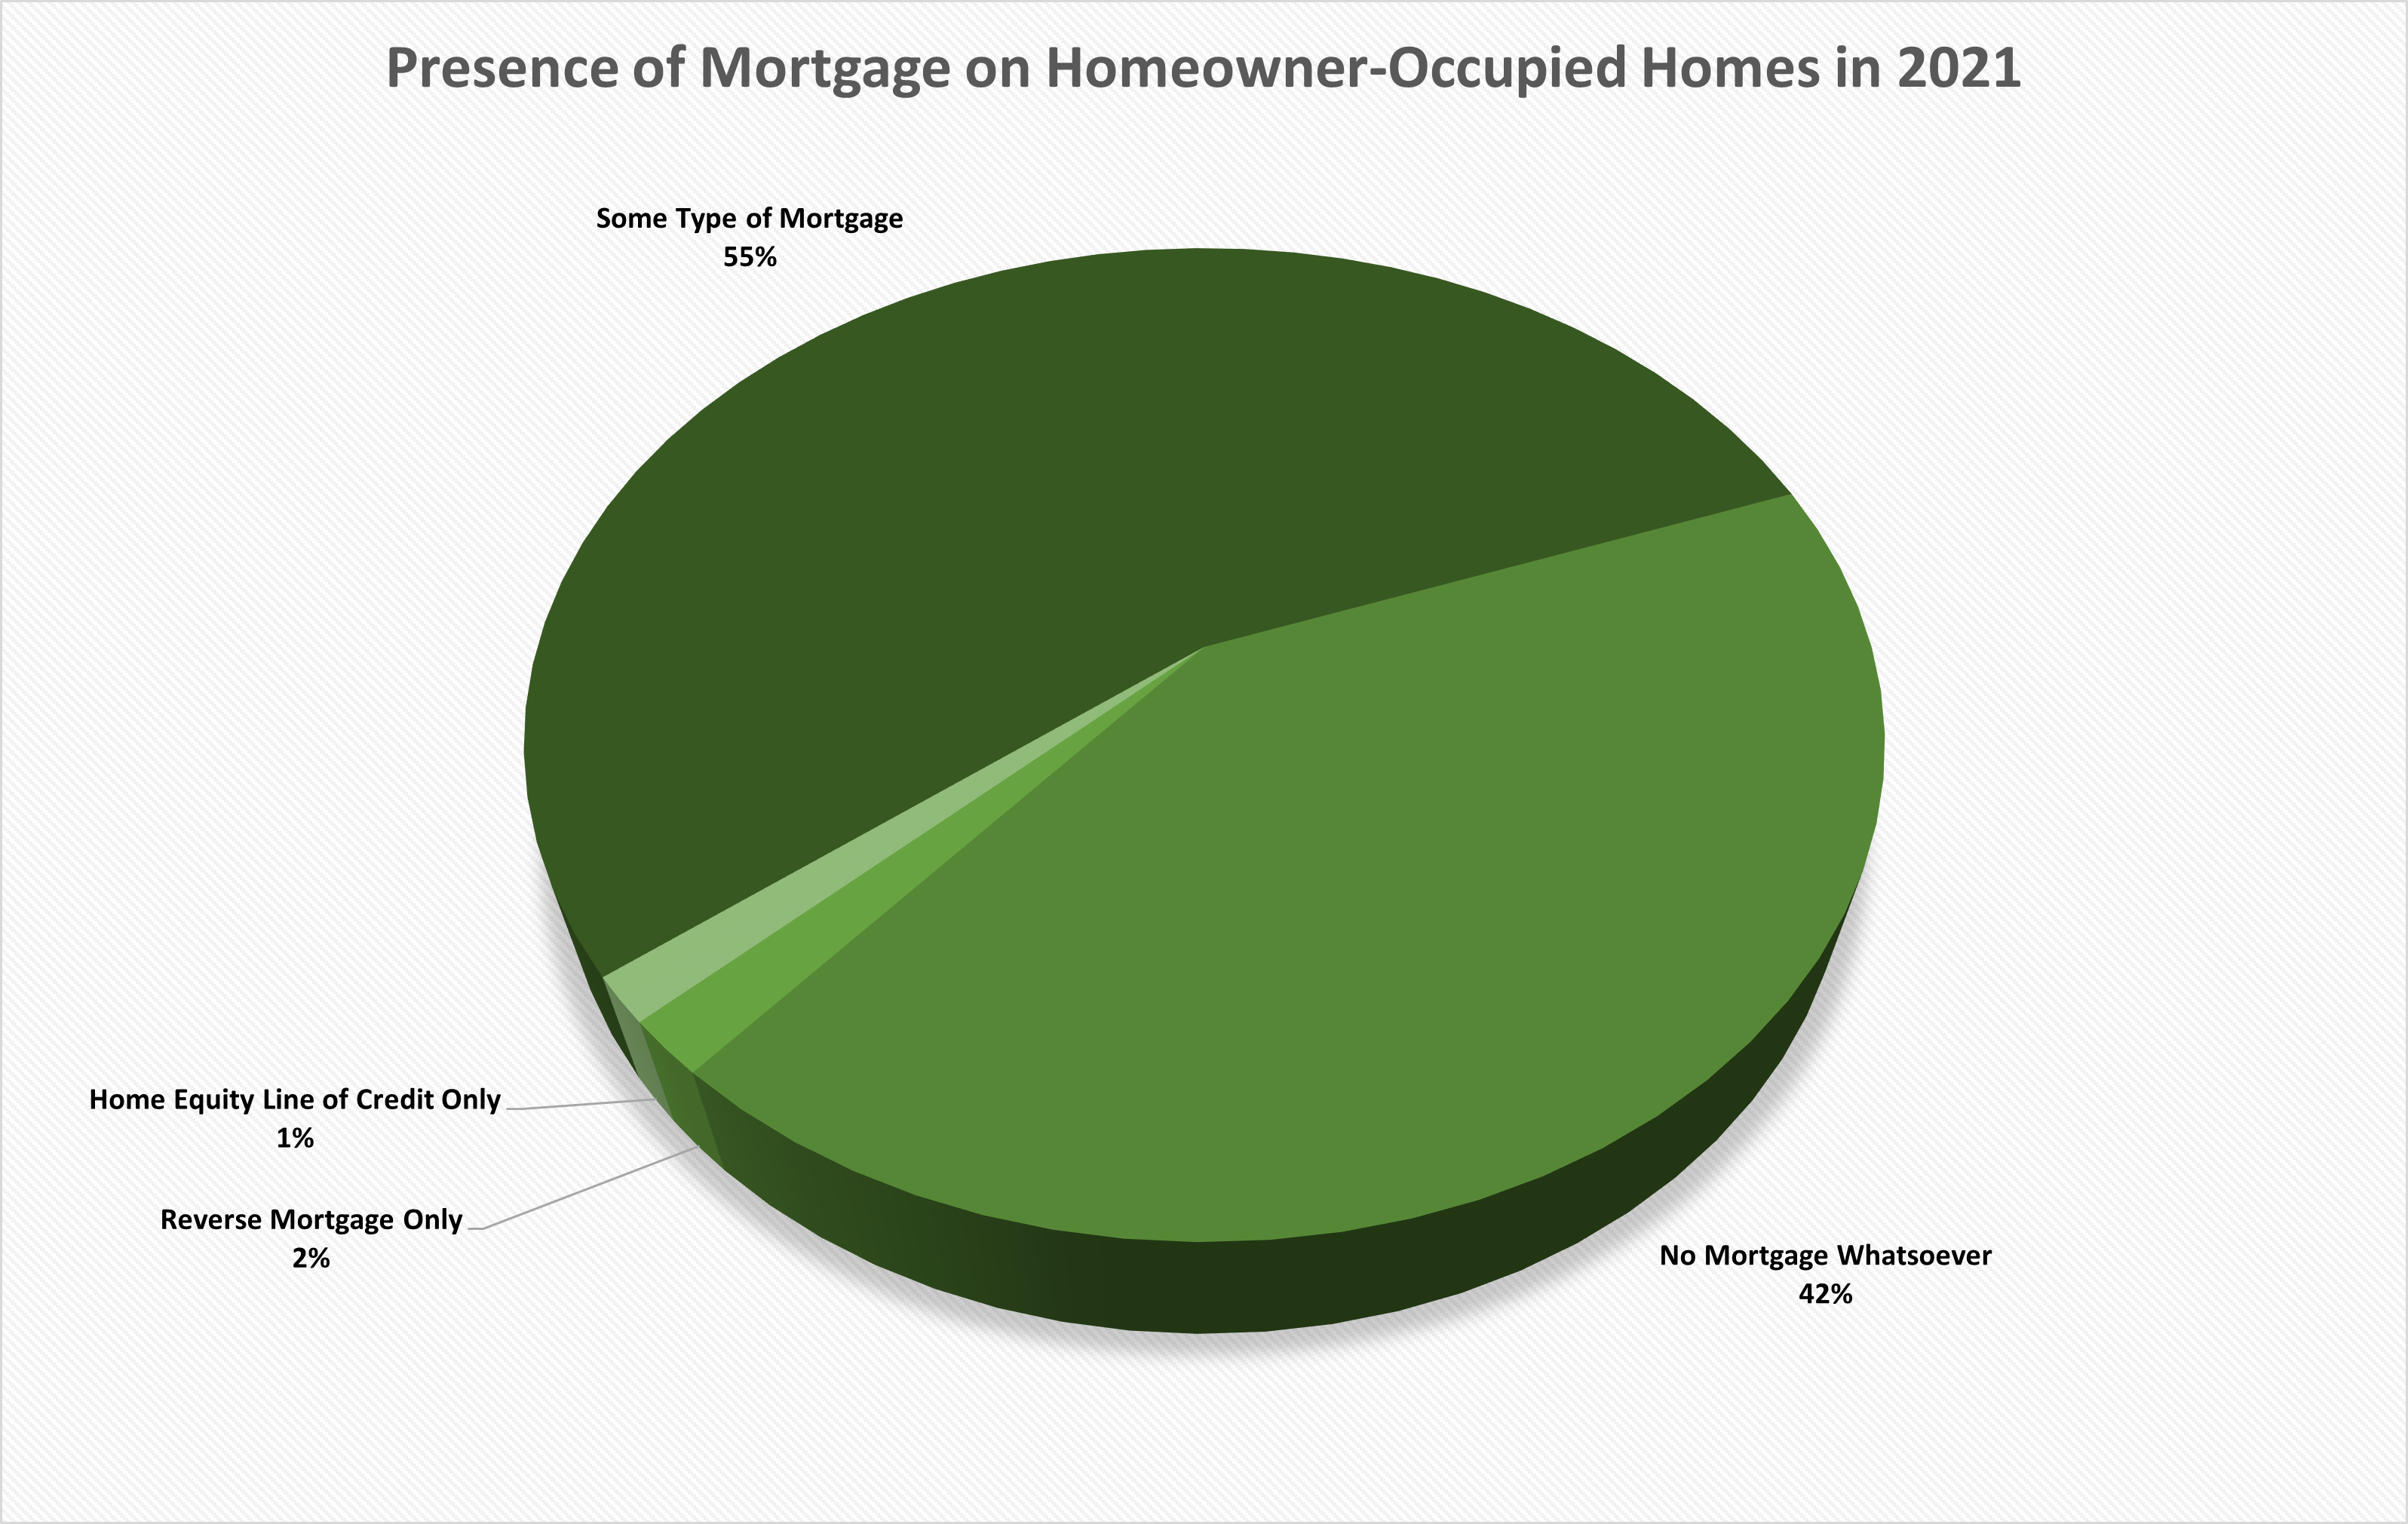 Presence of Mortgage on Homeowner-Occupied Homes in 2021